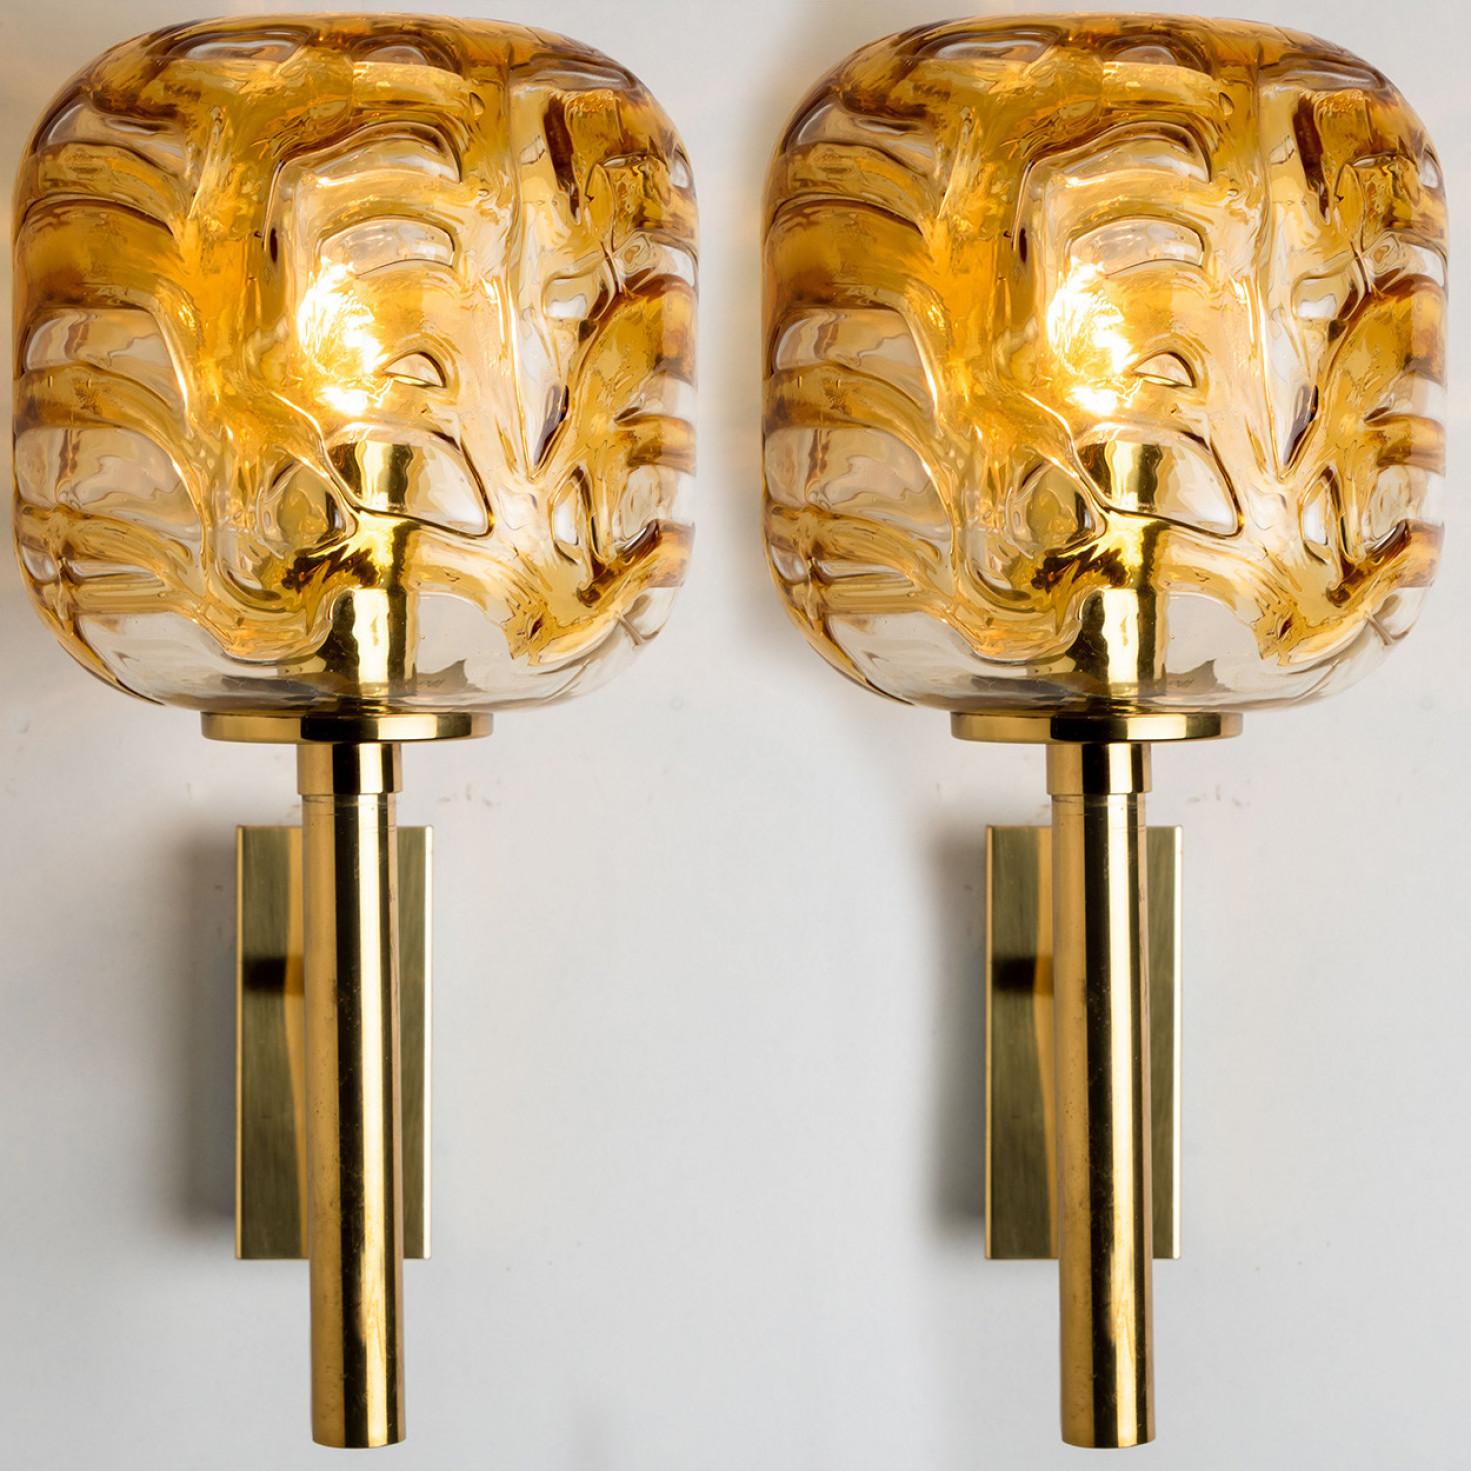 Other Pair of Murano Yellow Glass and Brass Wall Lights by Doria Leuchten, 1960s For Sale